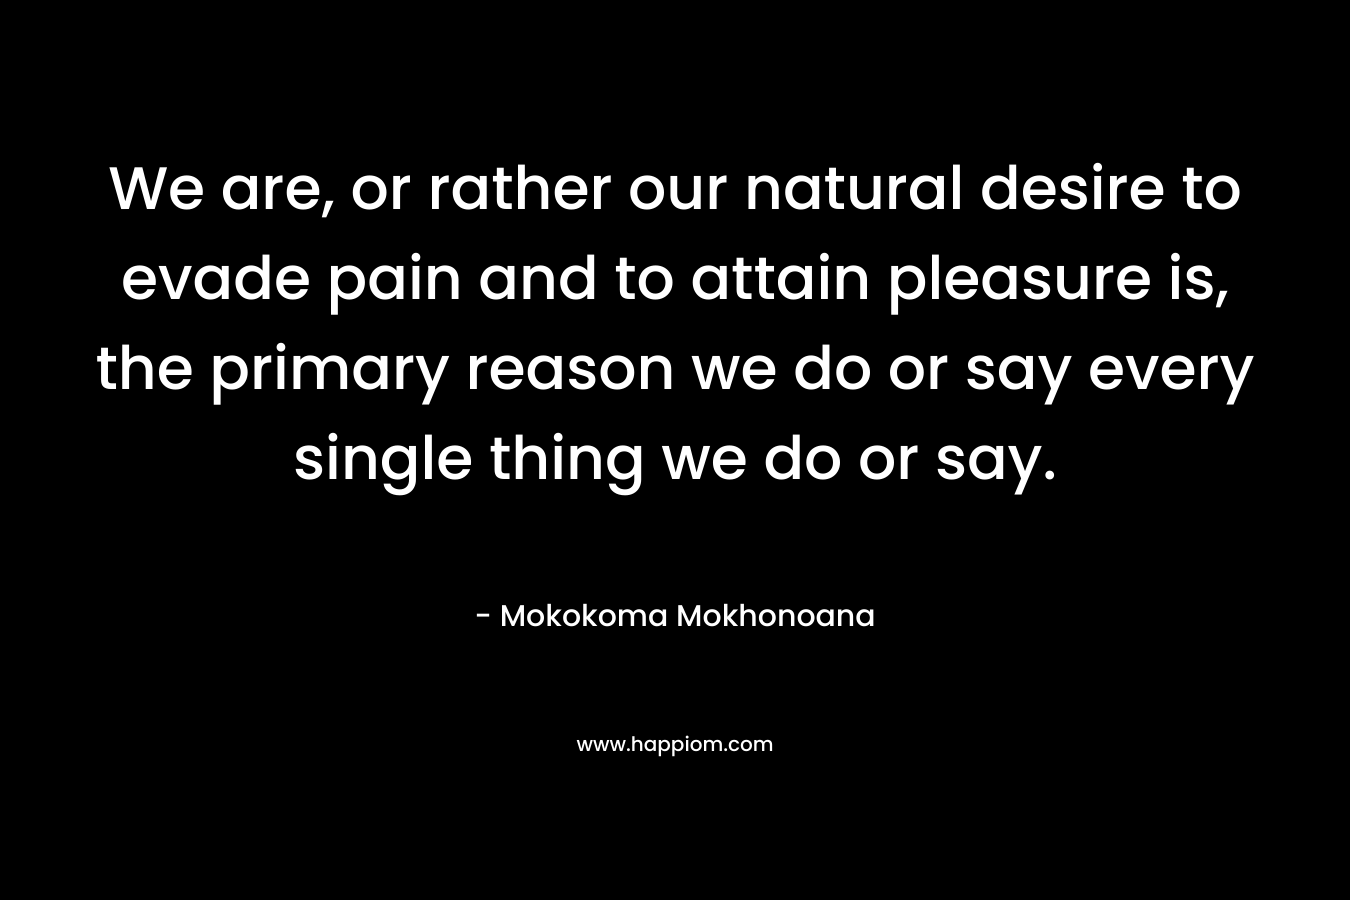 We are, or rather our natural desire to evade pain and to attain pleasure is, the primary reason we do or say every single thing we do or say.